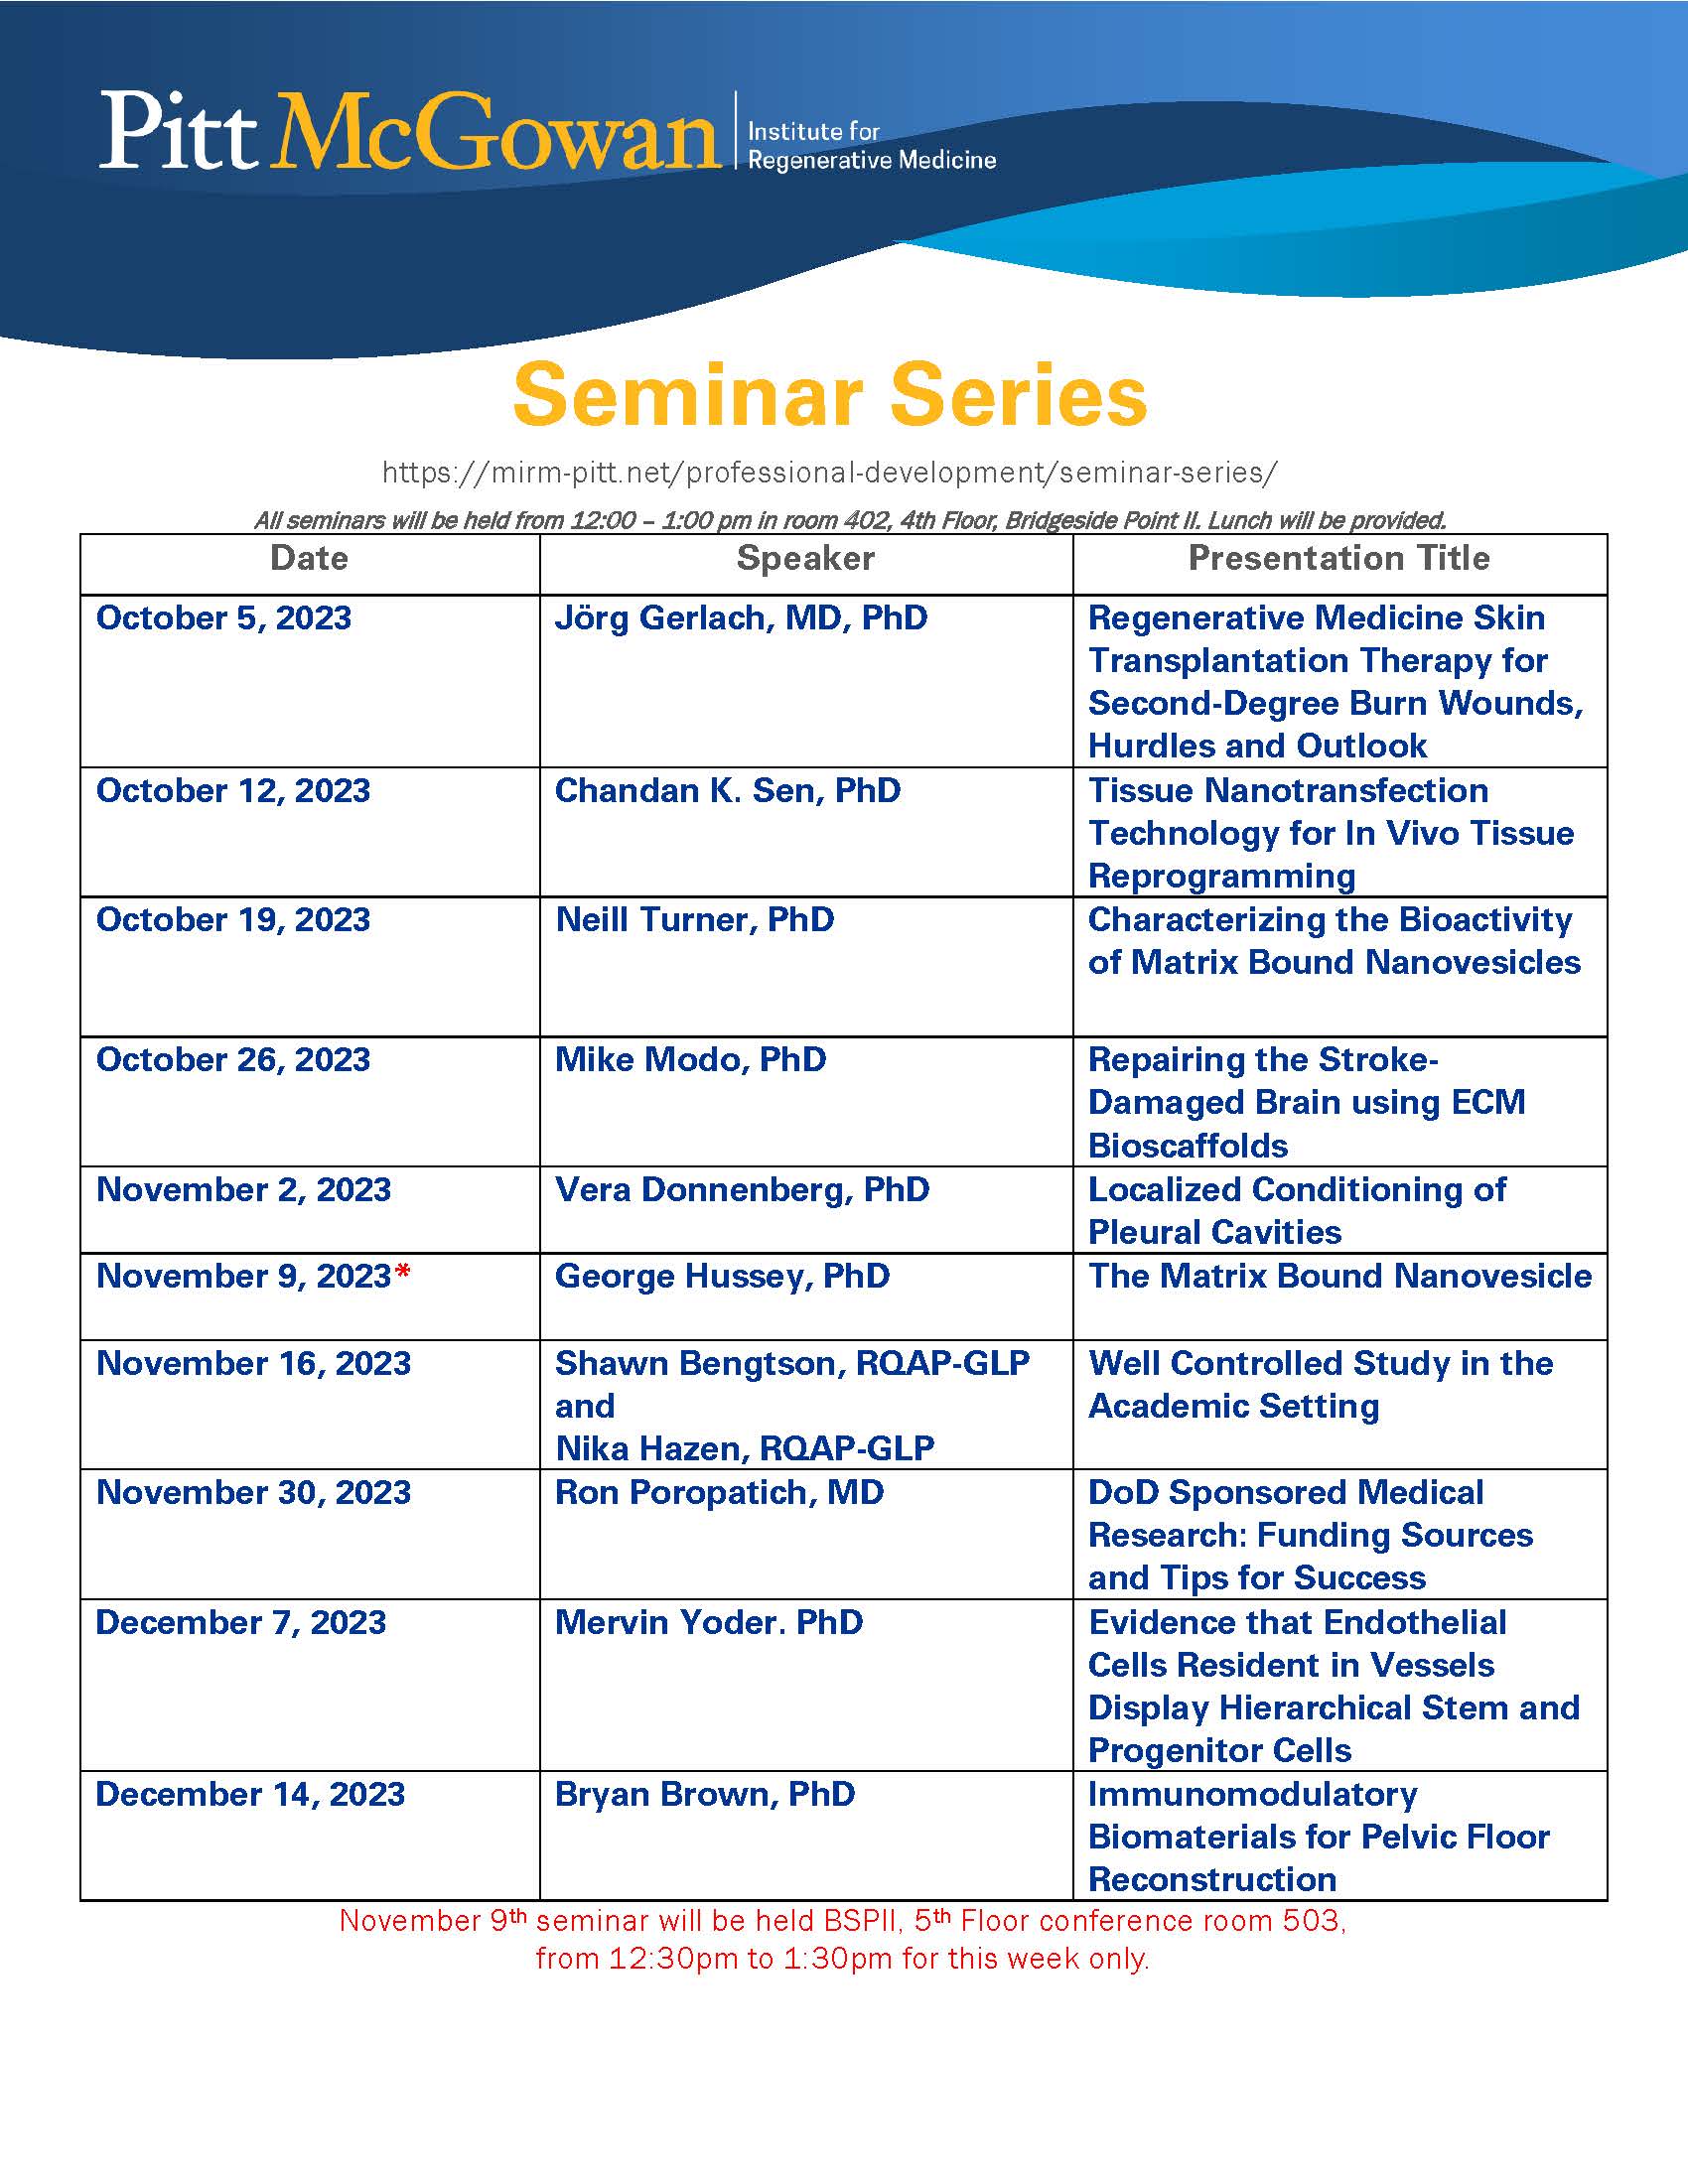 An image with the schedule of events for a scientific seminar series